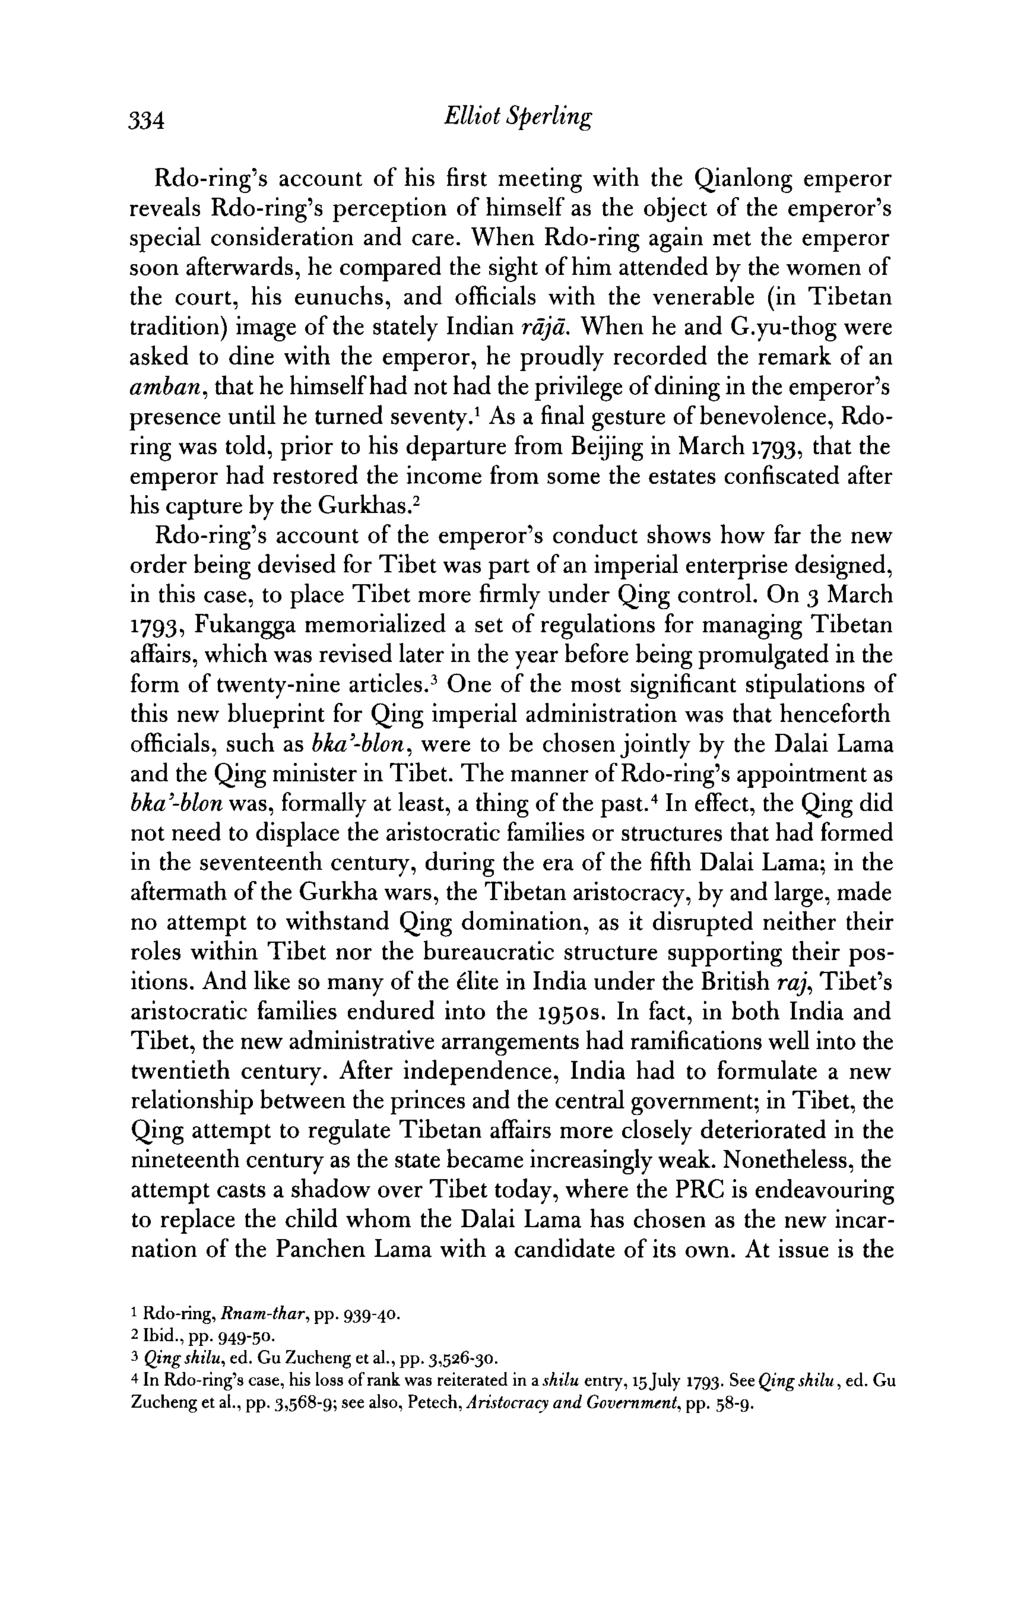 334 Elliot Sperling Rdo-ring's account of his first meeting with the Qianlong emperor reveals Rdo-ring's perception of himself as the object of the emperor's special consideration and care.